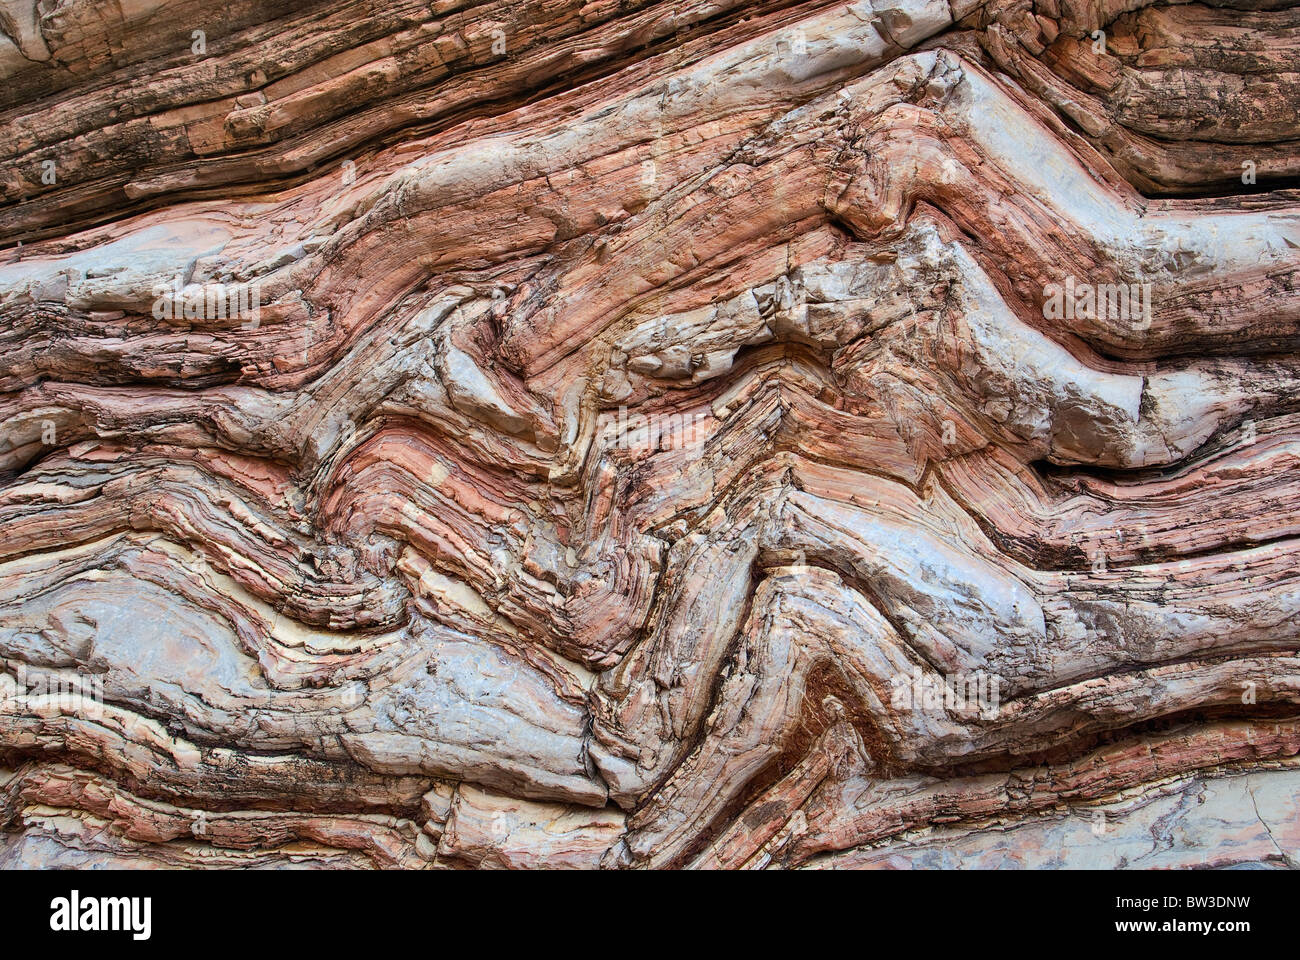 Boquillas formation limestone and shale twisted layers in Ernst Canyon, Chihuahuan Desert in Big Bend National Park, Texas, USA Stock Photo